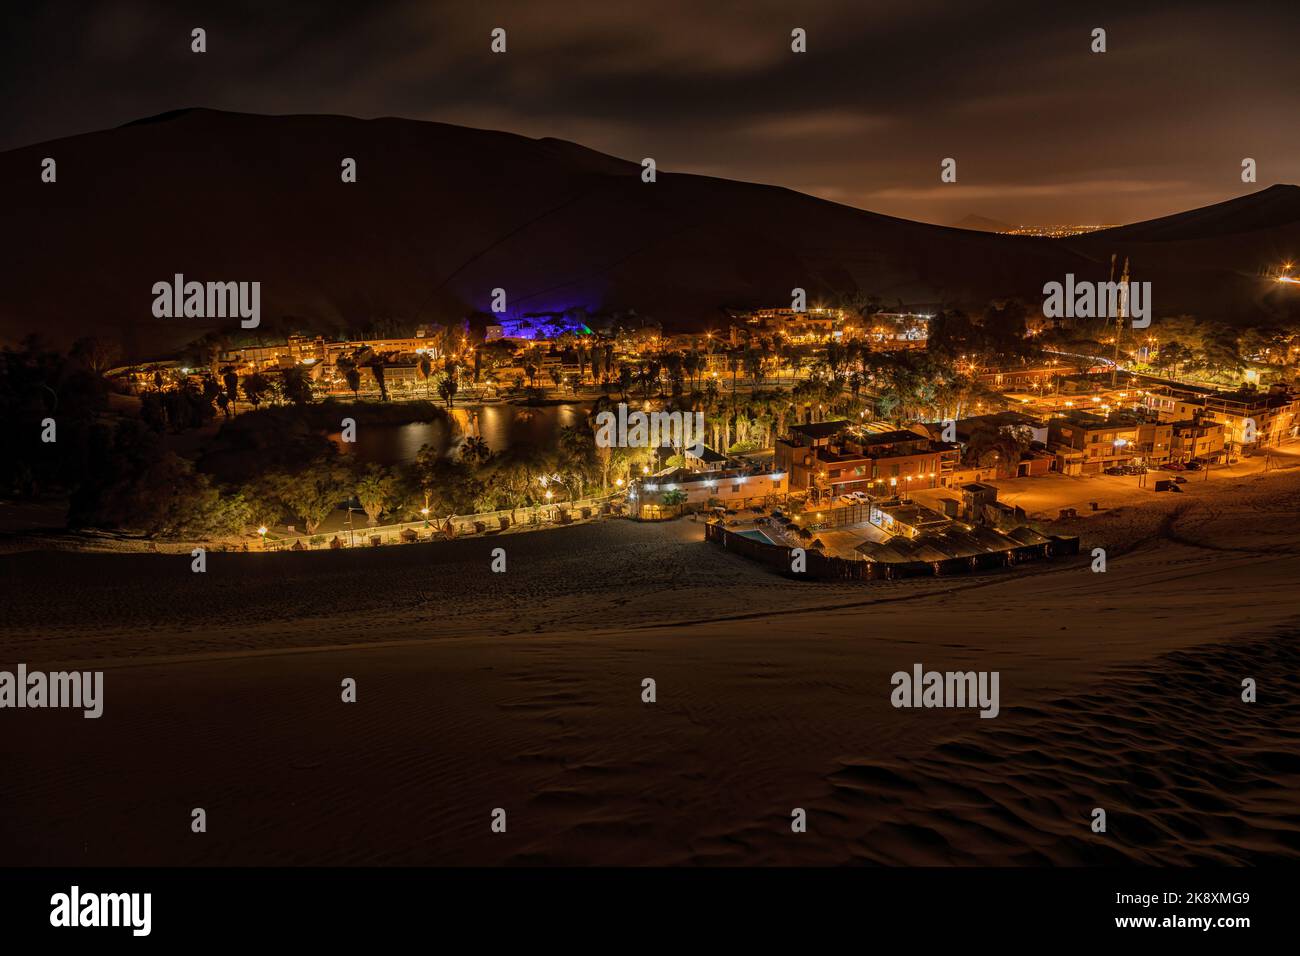 Wide angle long exposure of the desert oasis of Huacachina in Peru at night. Stock Photo